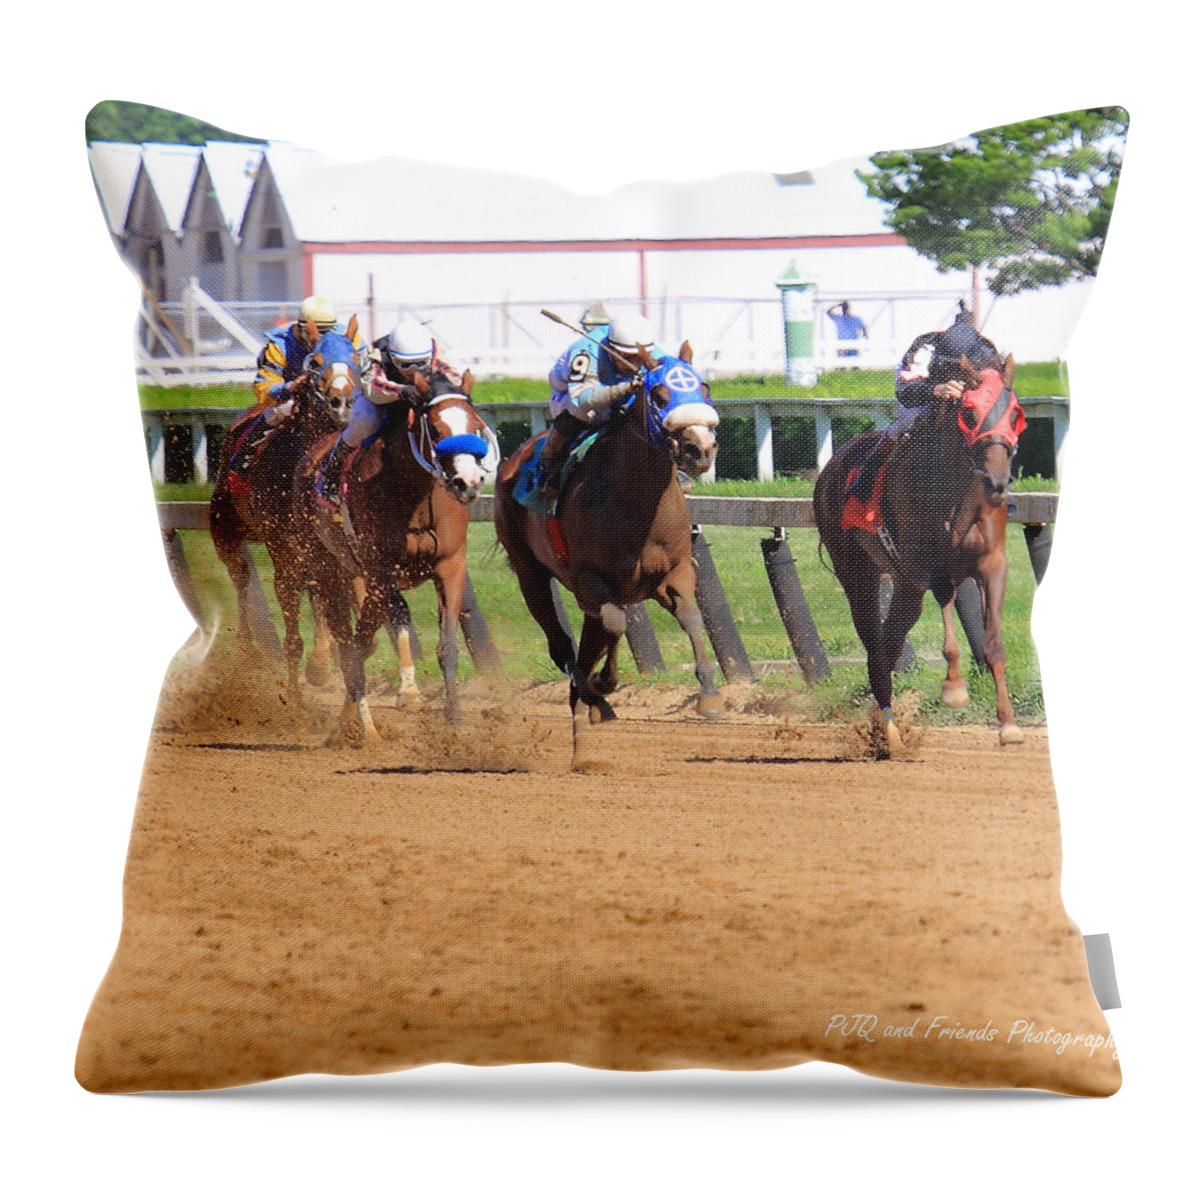  Throw Pillow featuring the photograph 'Kickin' Dirt' by PJQandFriends Photography